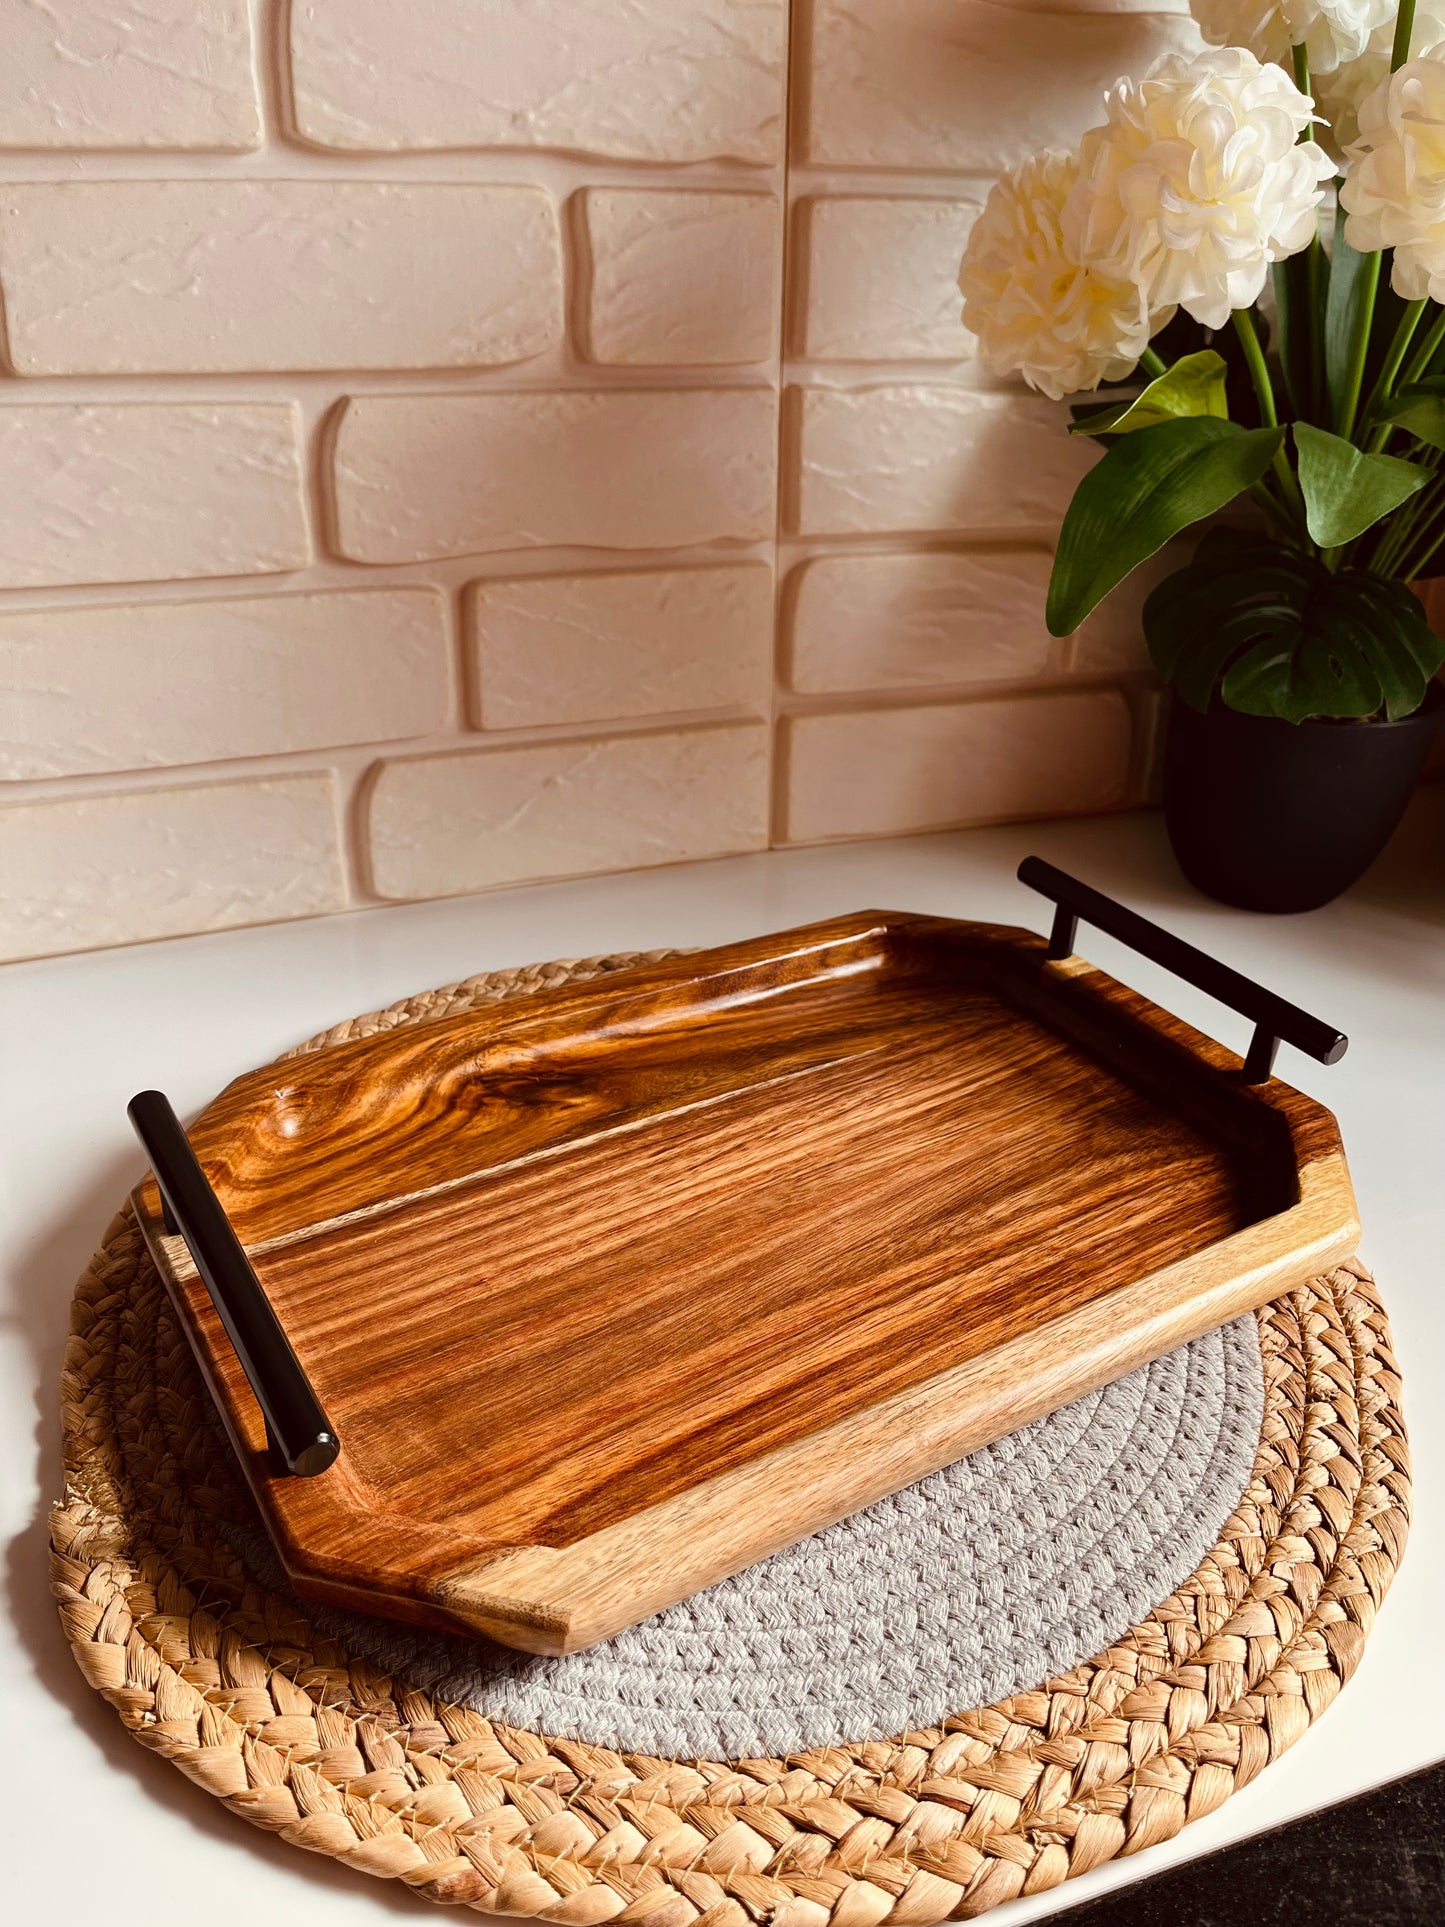 (NEW) Wooden tray small size 22x35cm